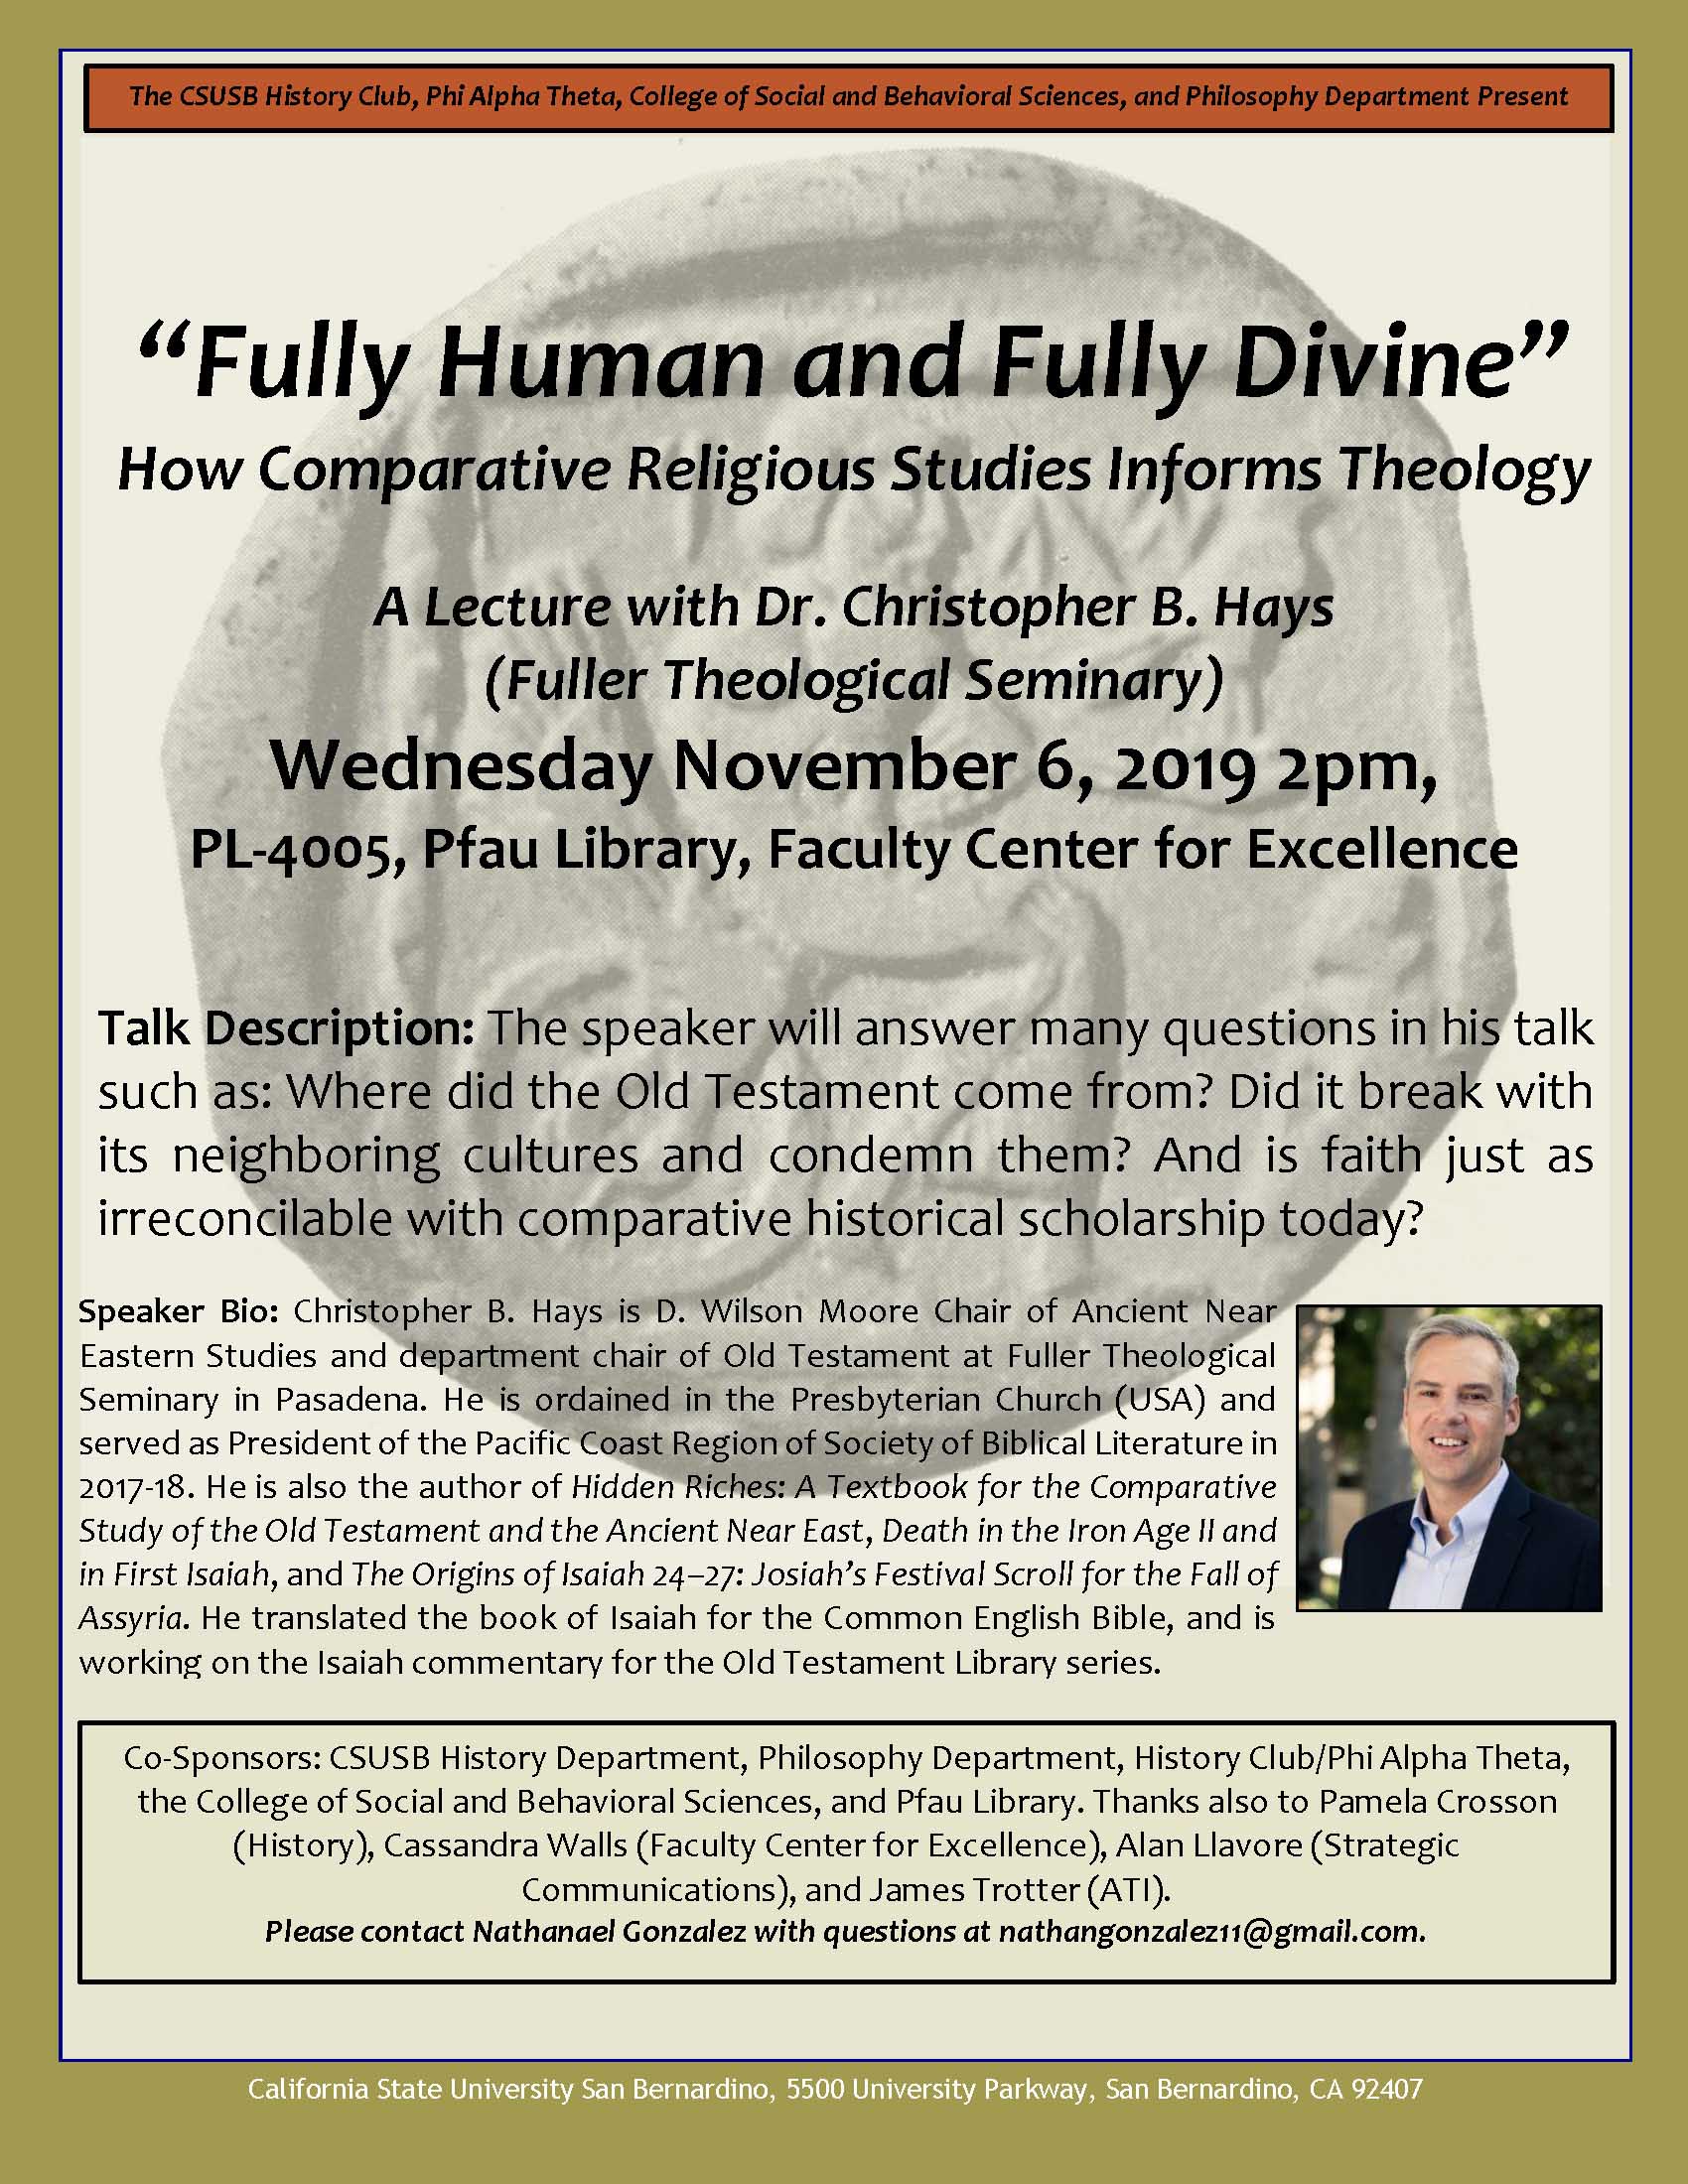 Comparative religious studies and how it informs theology topic of talk on Nov. 6